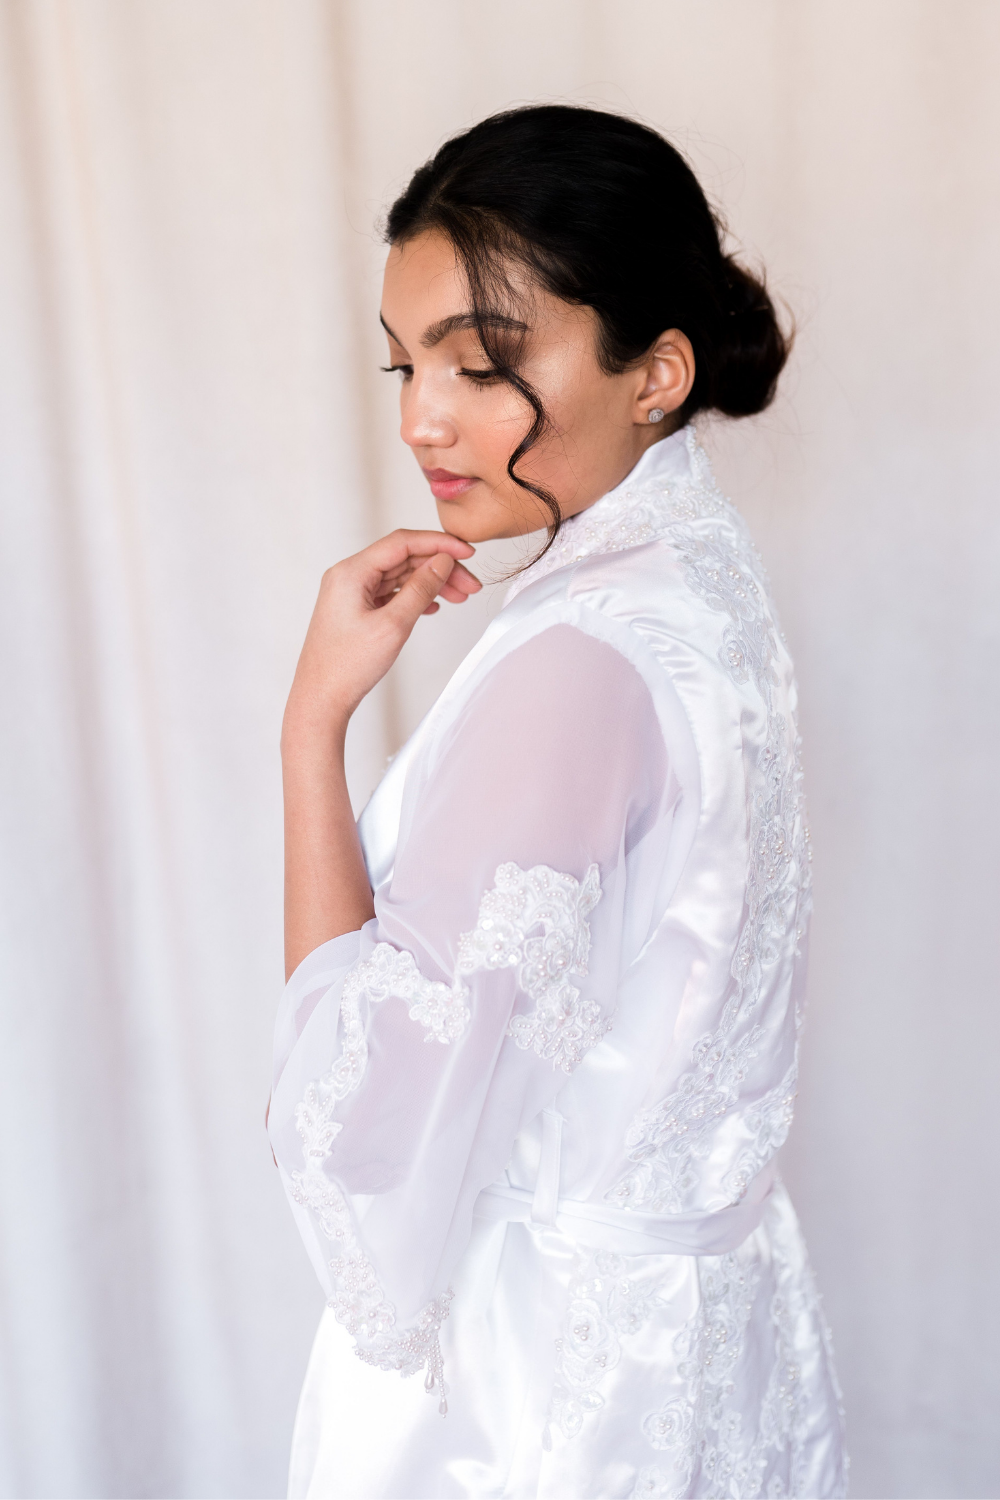 Sheer Bridal Robe With Pearls, Robe for Wedding Night, Bridal Robe, Sheer  Wedding Dress, Long Bridal Robe, Wedding Outfit White Robe, 